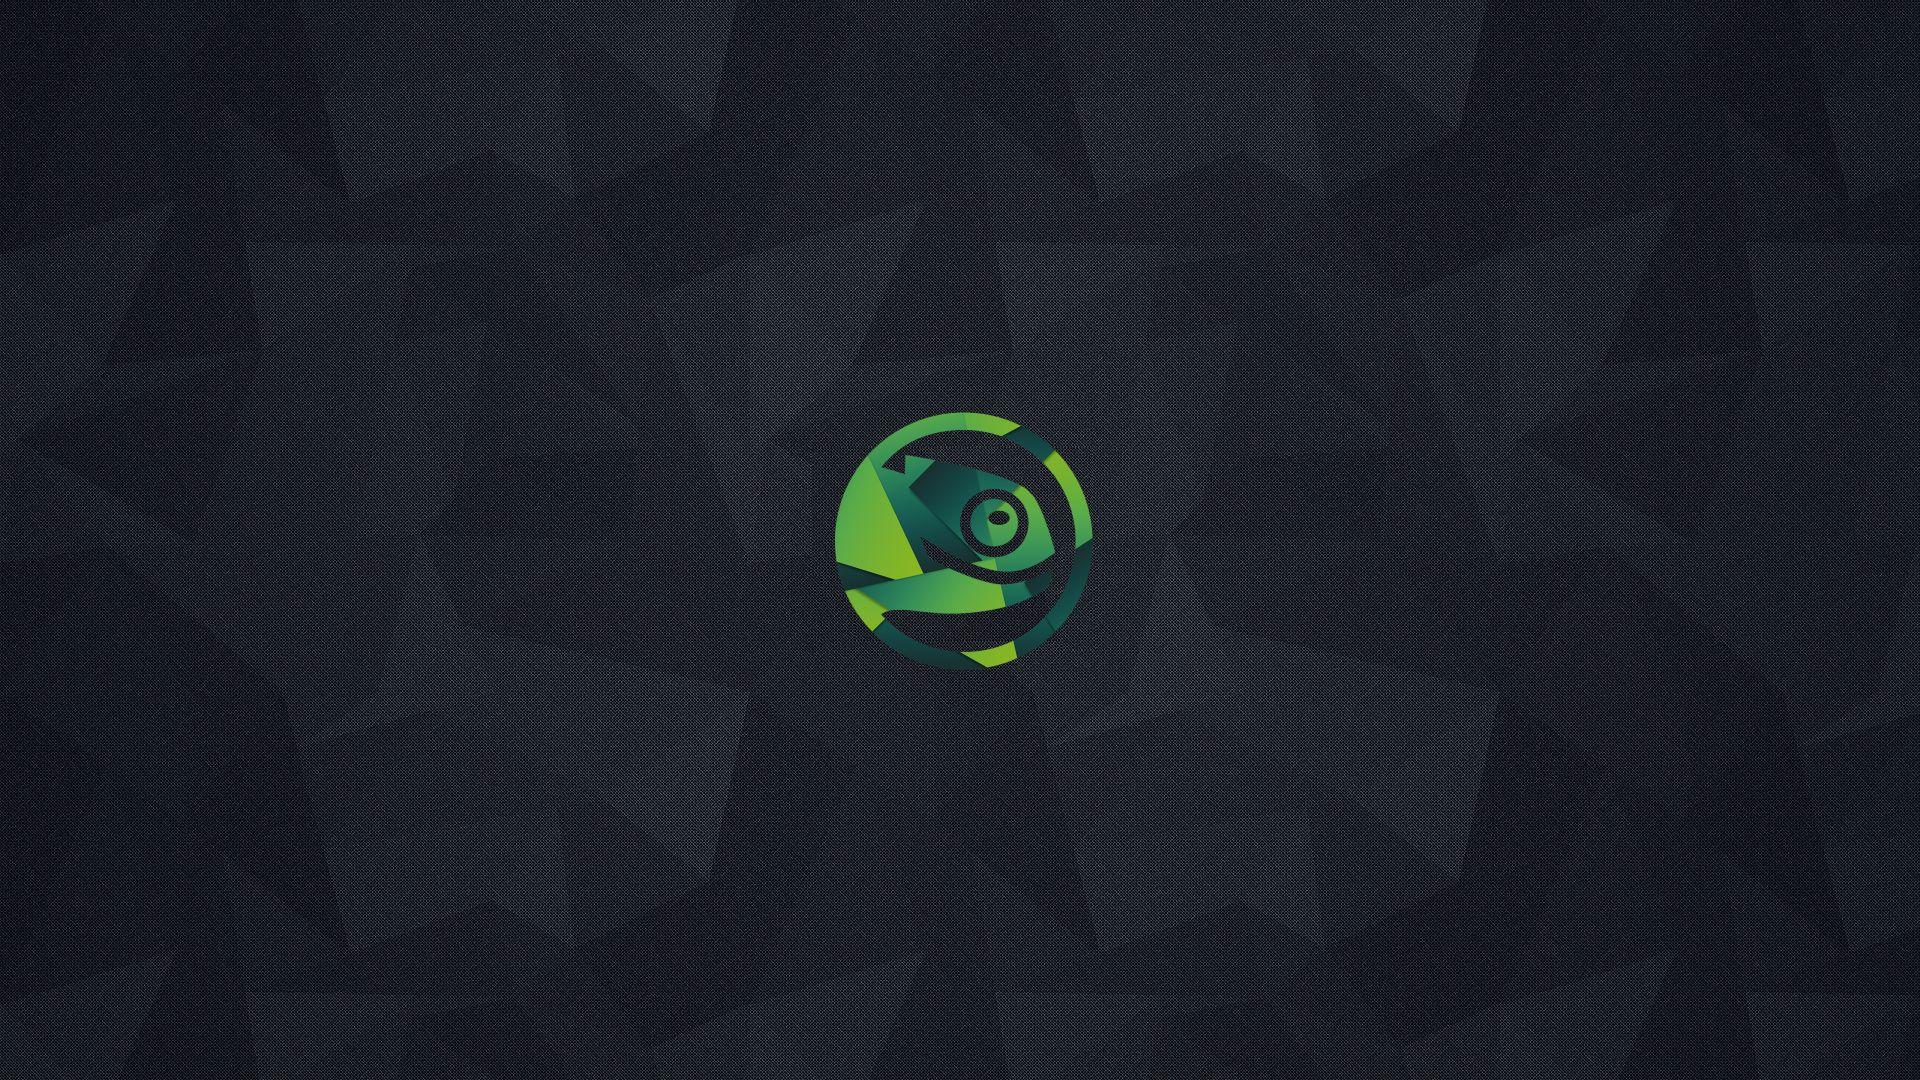 Wallpapers Full HD Opensuse - Wallpaper Cave